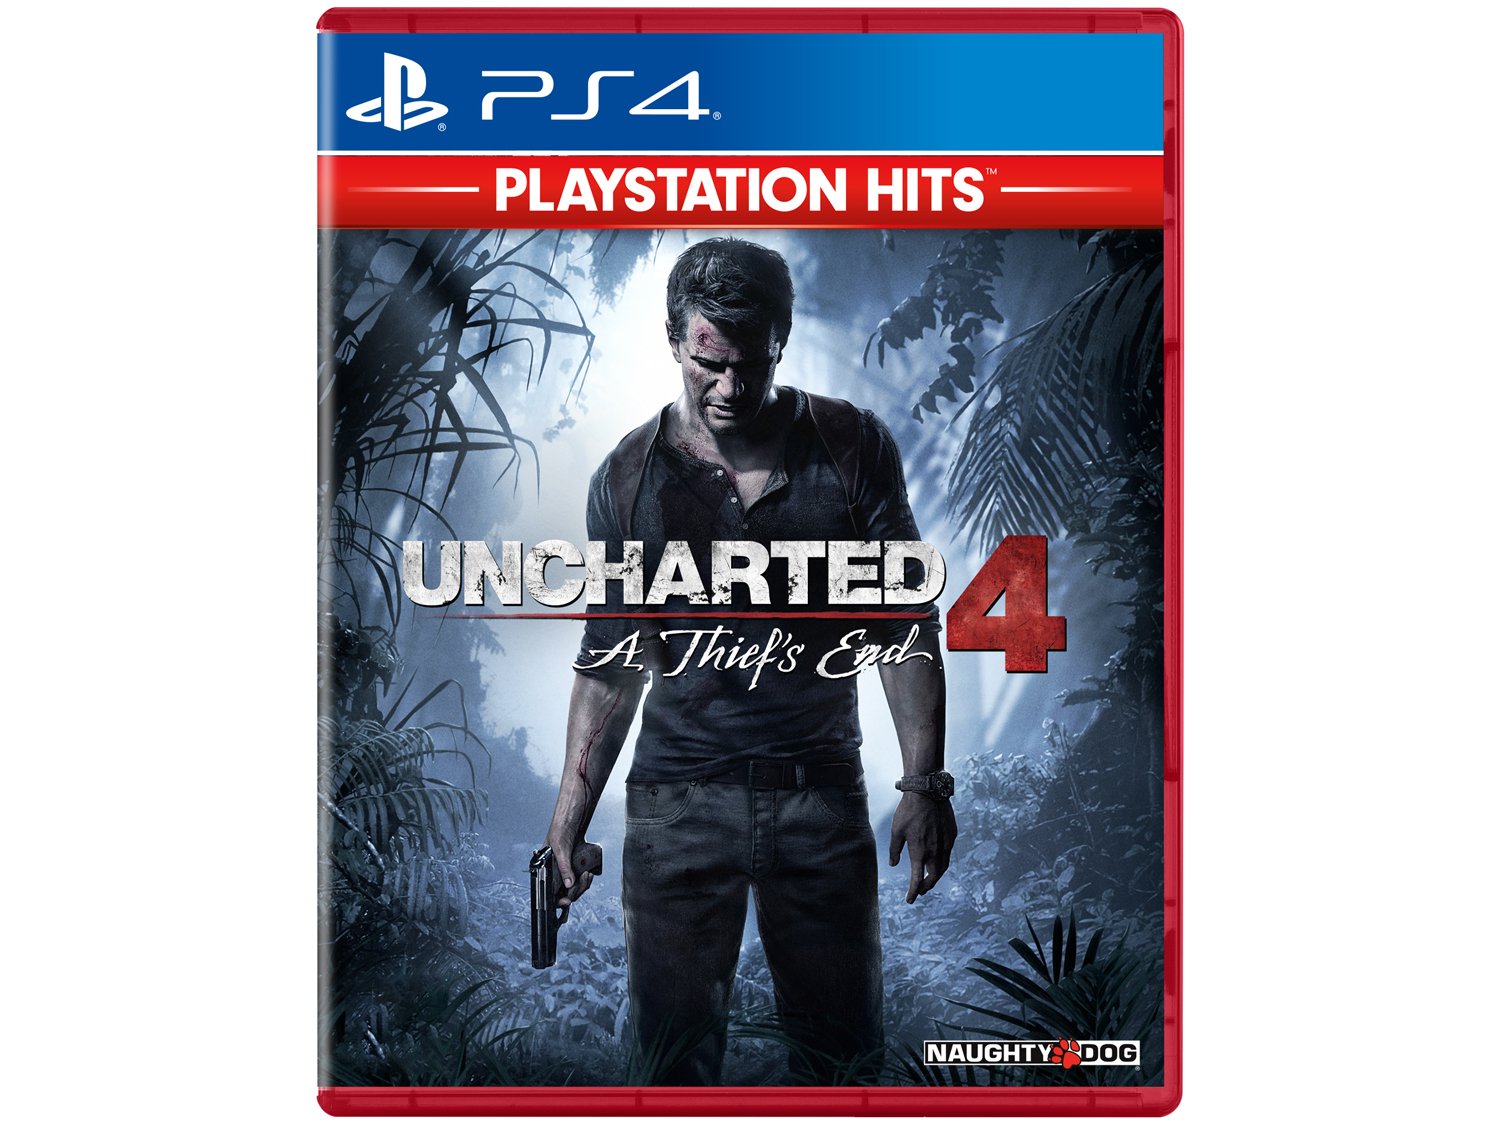 Jogo Uncharted 4: A Thief`s End - Playstation Hits - PS4